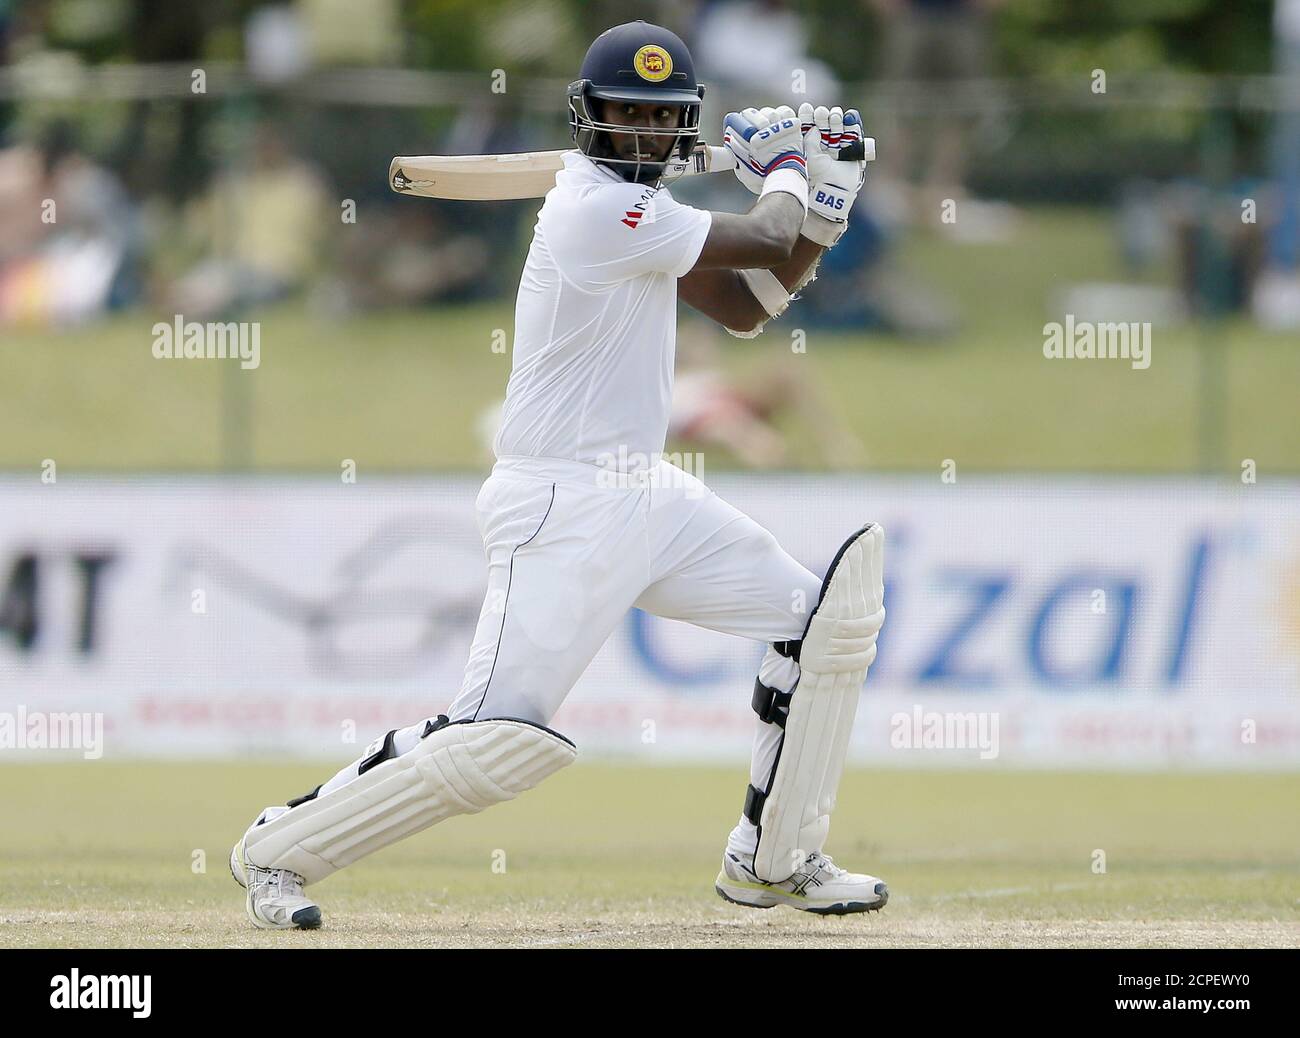 Sri Lanka's captain Angelo Mathews watches his shot during the third day of their second test cricket match against India in Colombo August 22, 2015. REUTERS/Dinuka Liyanawatte Stock Photo